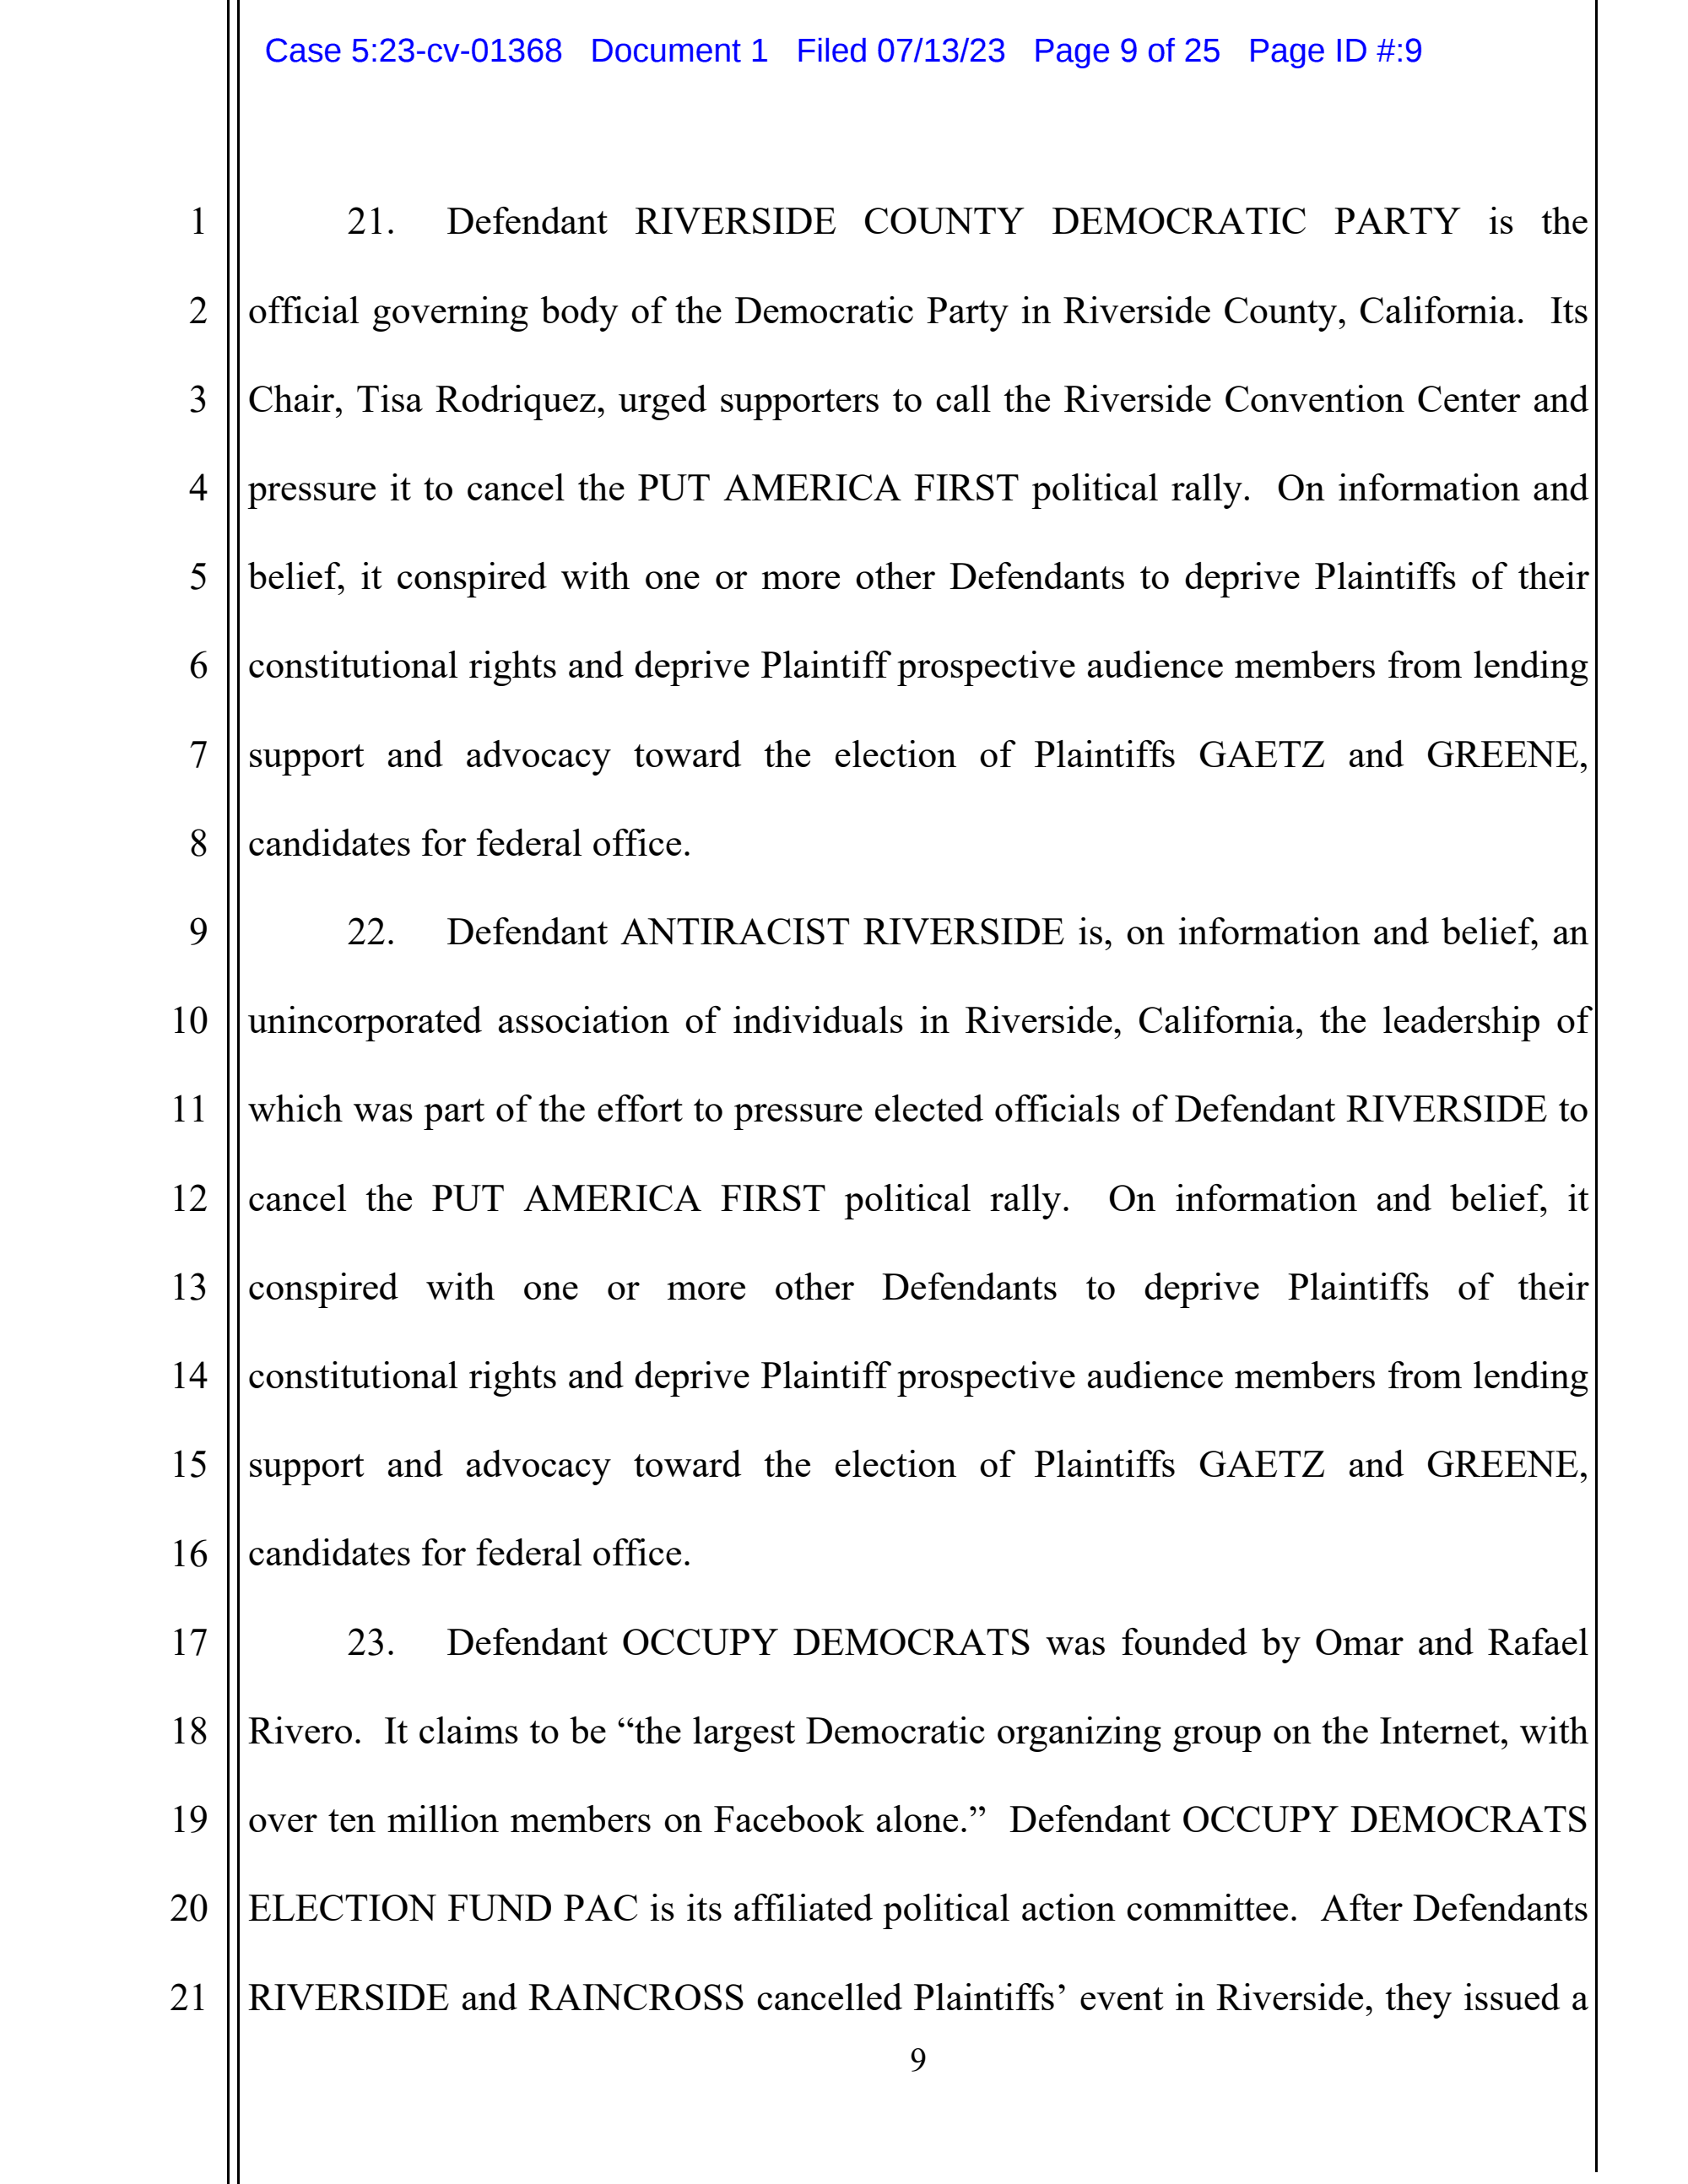 Page 9 of Gaetz & Greene v. Occupy Democrats Complaint